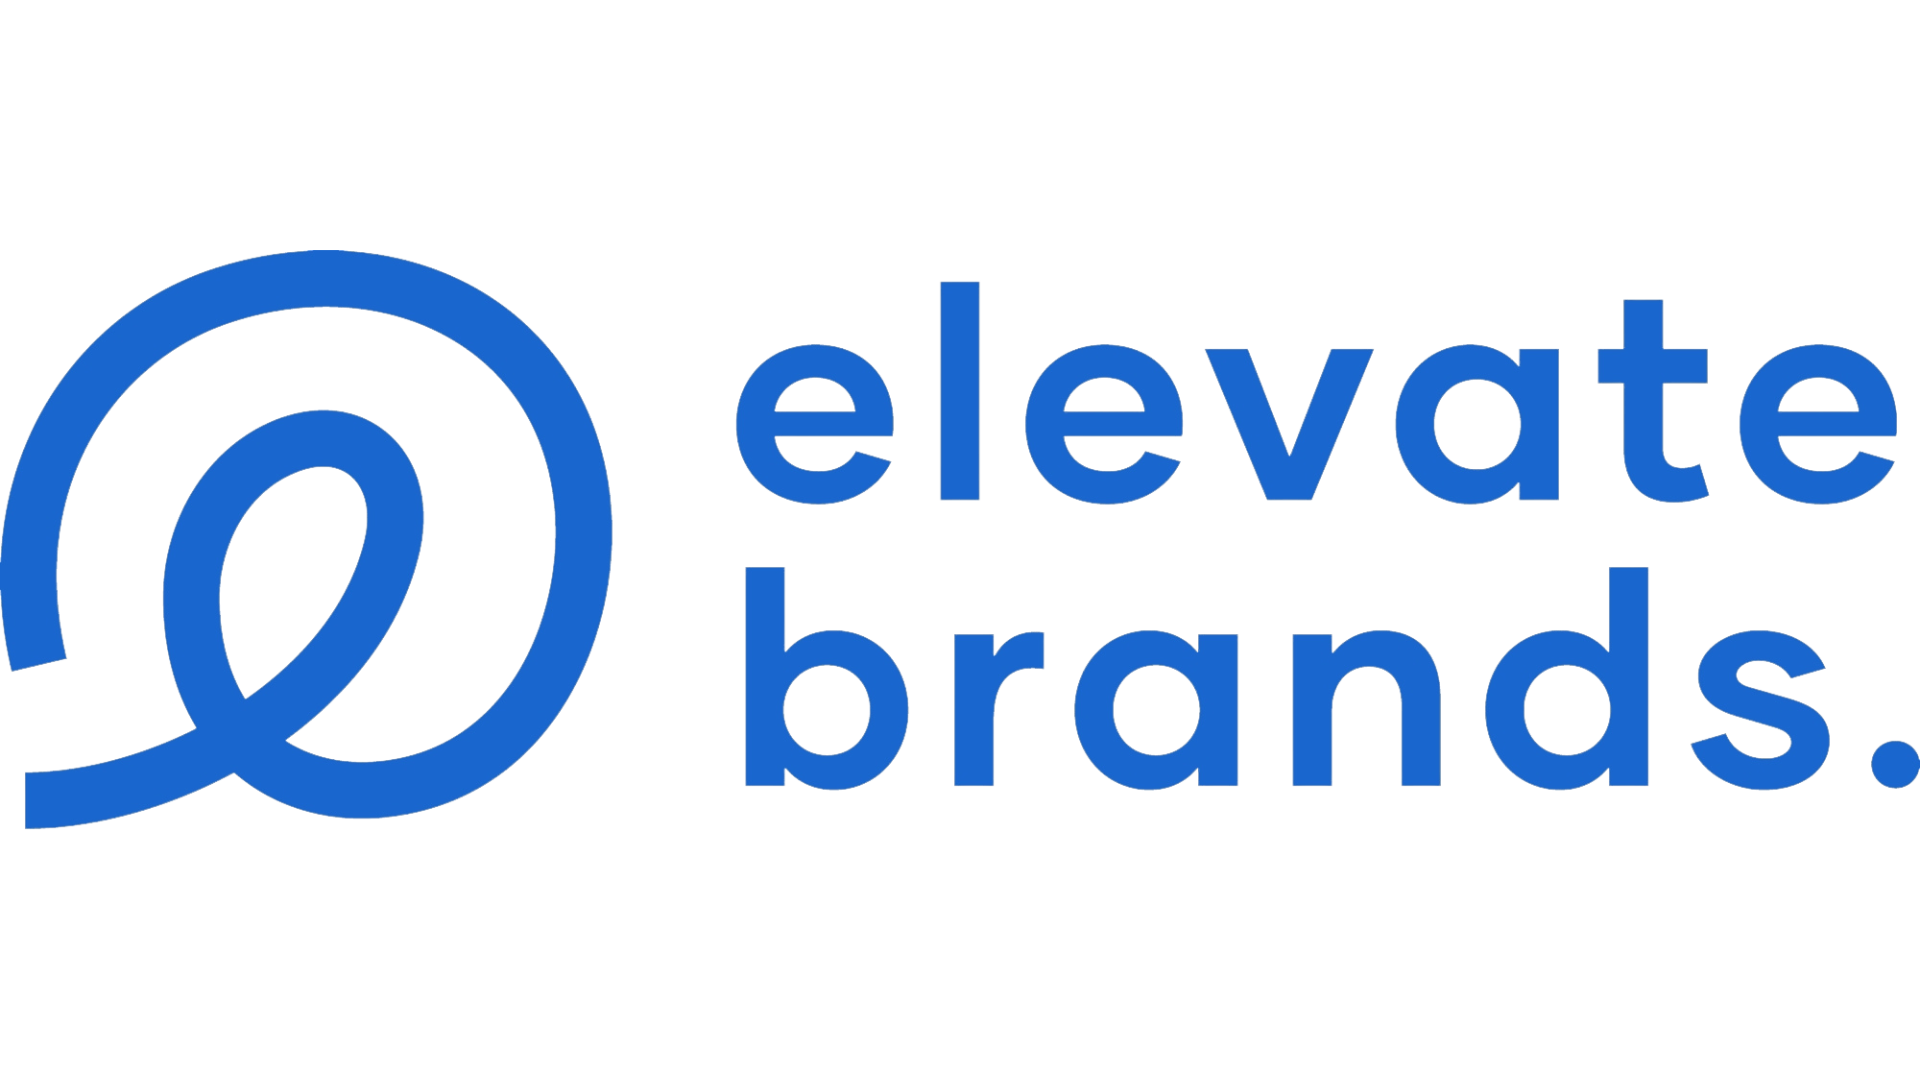 elevate brands is a client of BlueRyse Walmart.com management